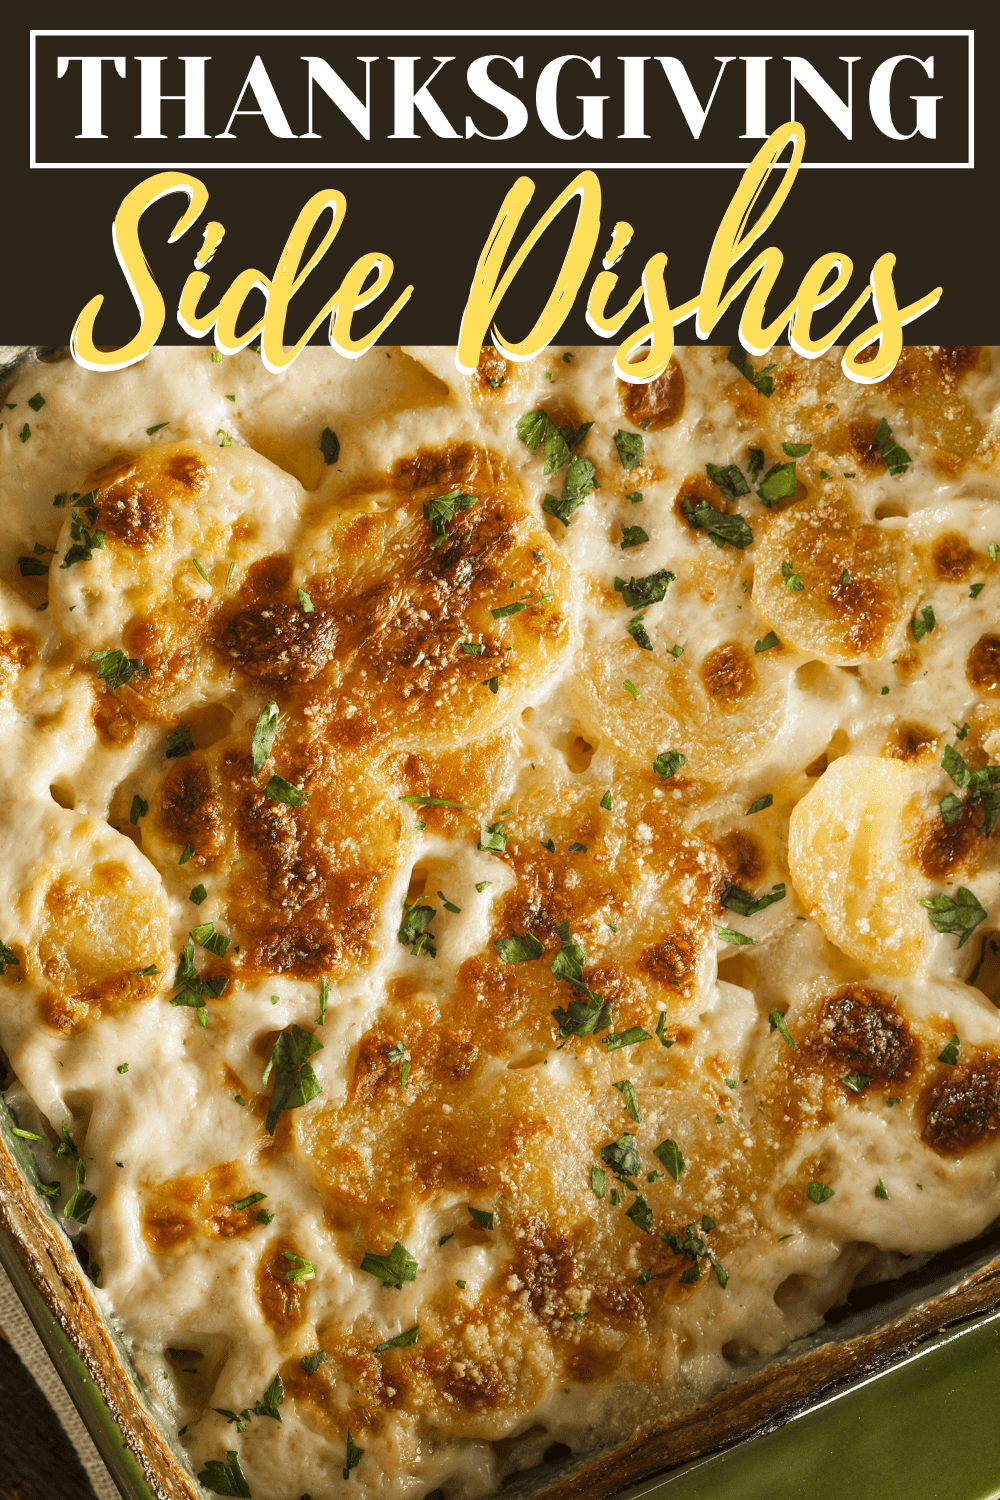 15 Thanksgiving Side Dishes (+ Easy Recipes) - Insanely Good